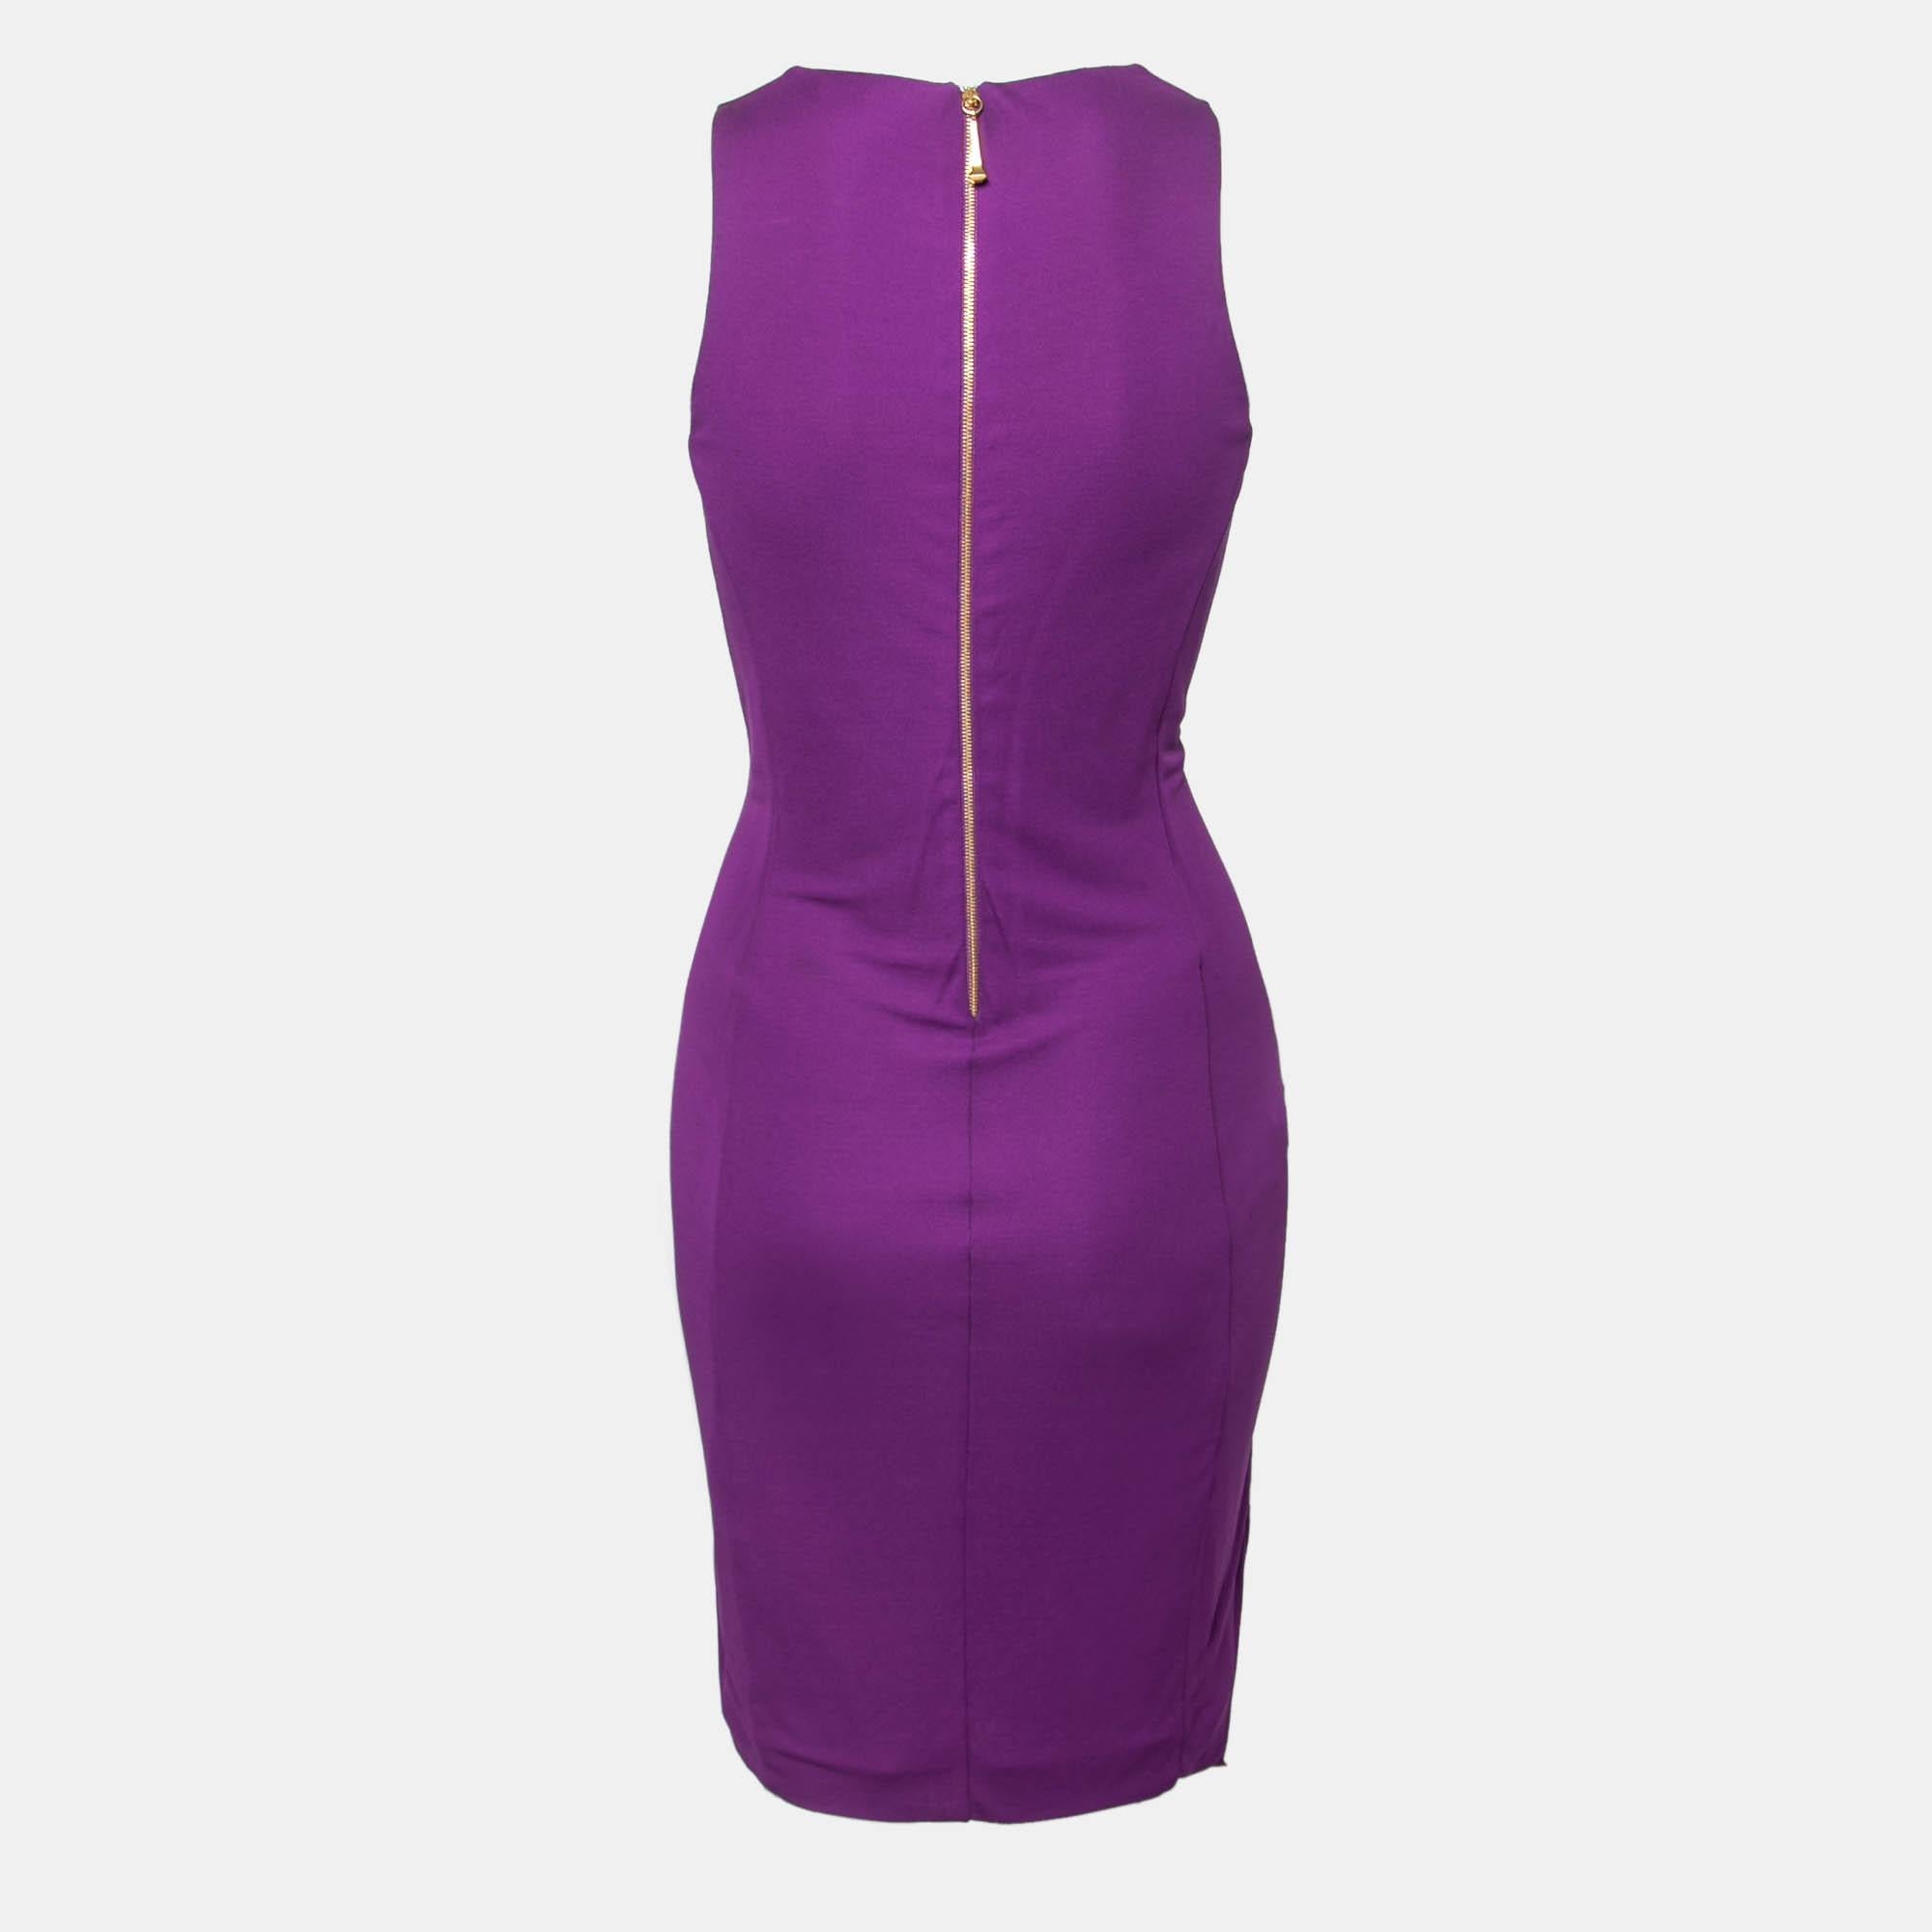 Make a glamorous entrance at the next cocktail party wearing this gorgeous dress from Gucci. The purple dress displays a fabulous tie detail on the front and has a flattering silhouette. A deep V-neckline completes this sleeveless dress that you can